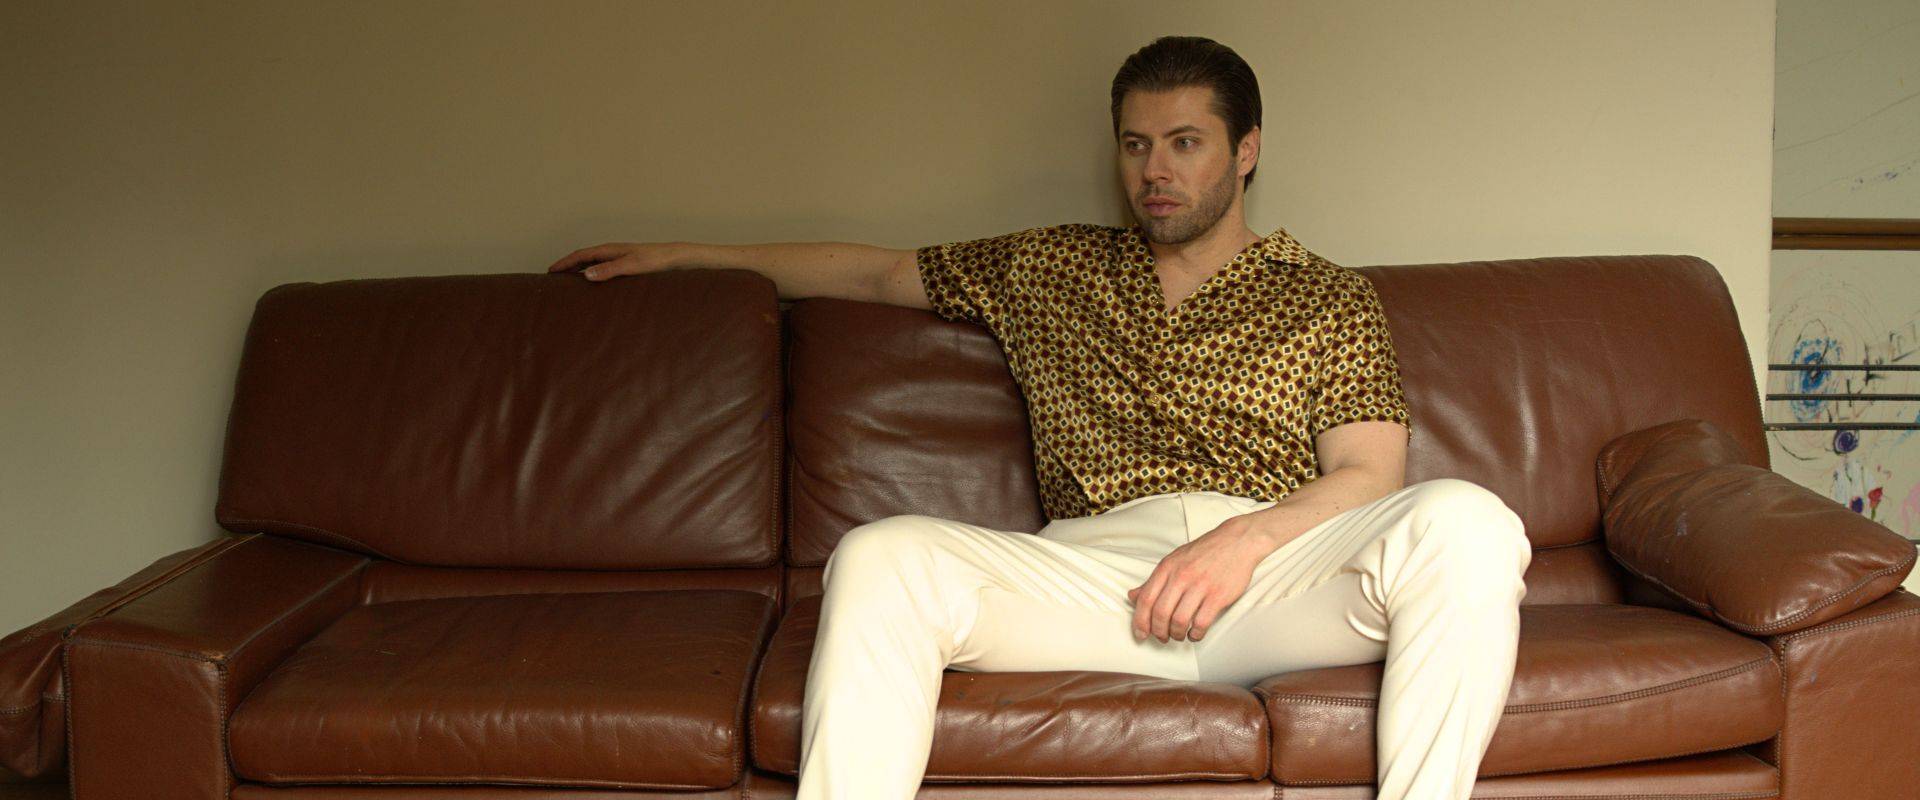 all collections product page header image of a man wearing a silk shirt and white pants sitting on a sofa